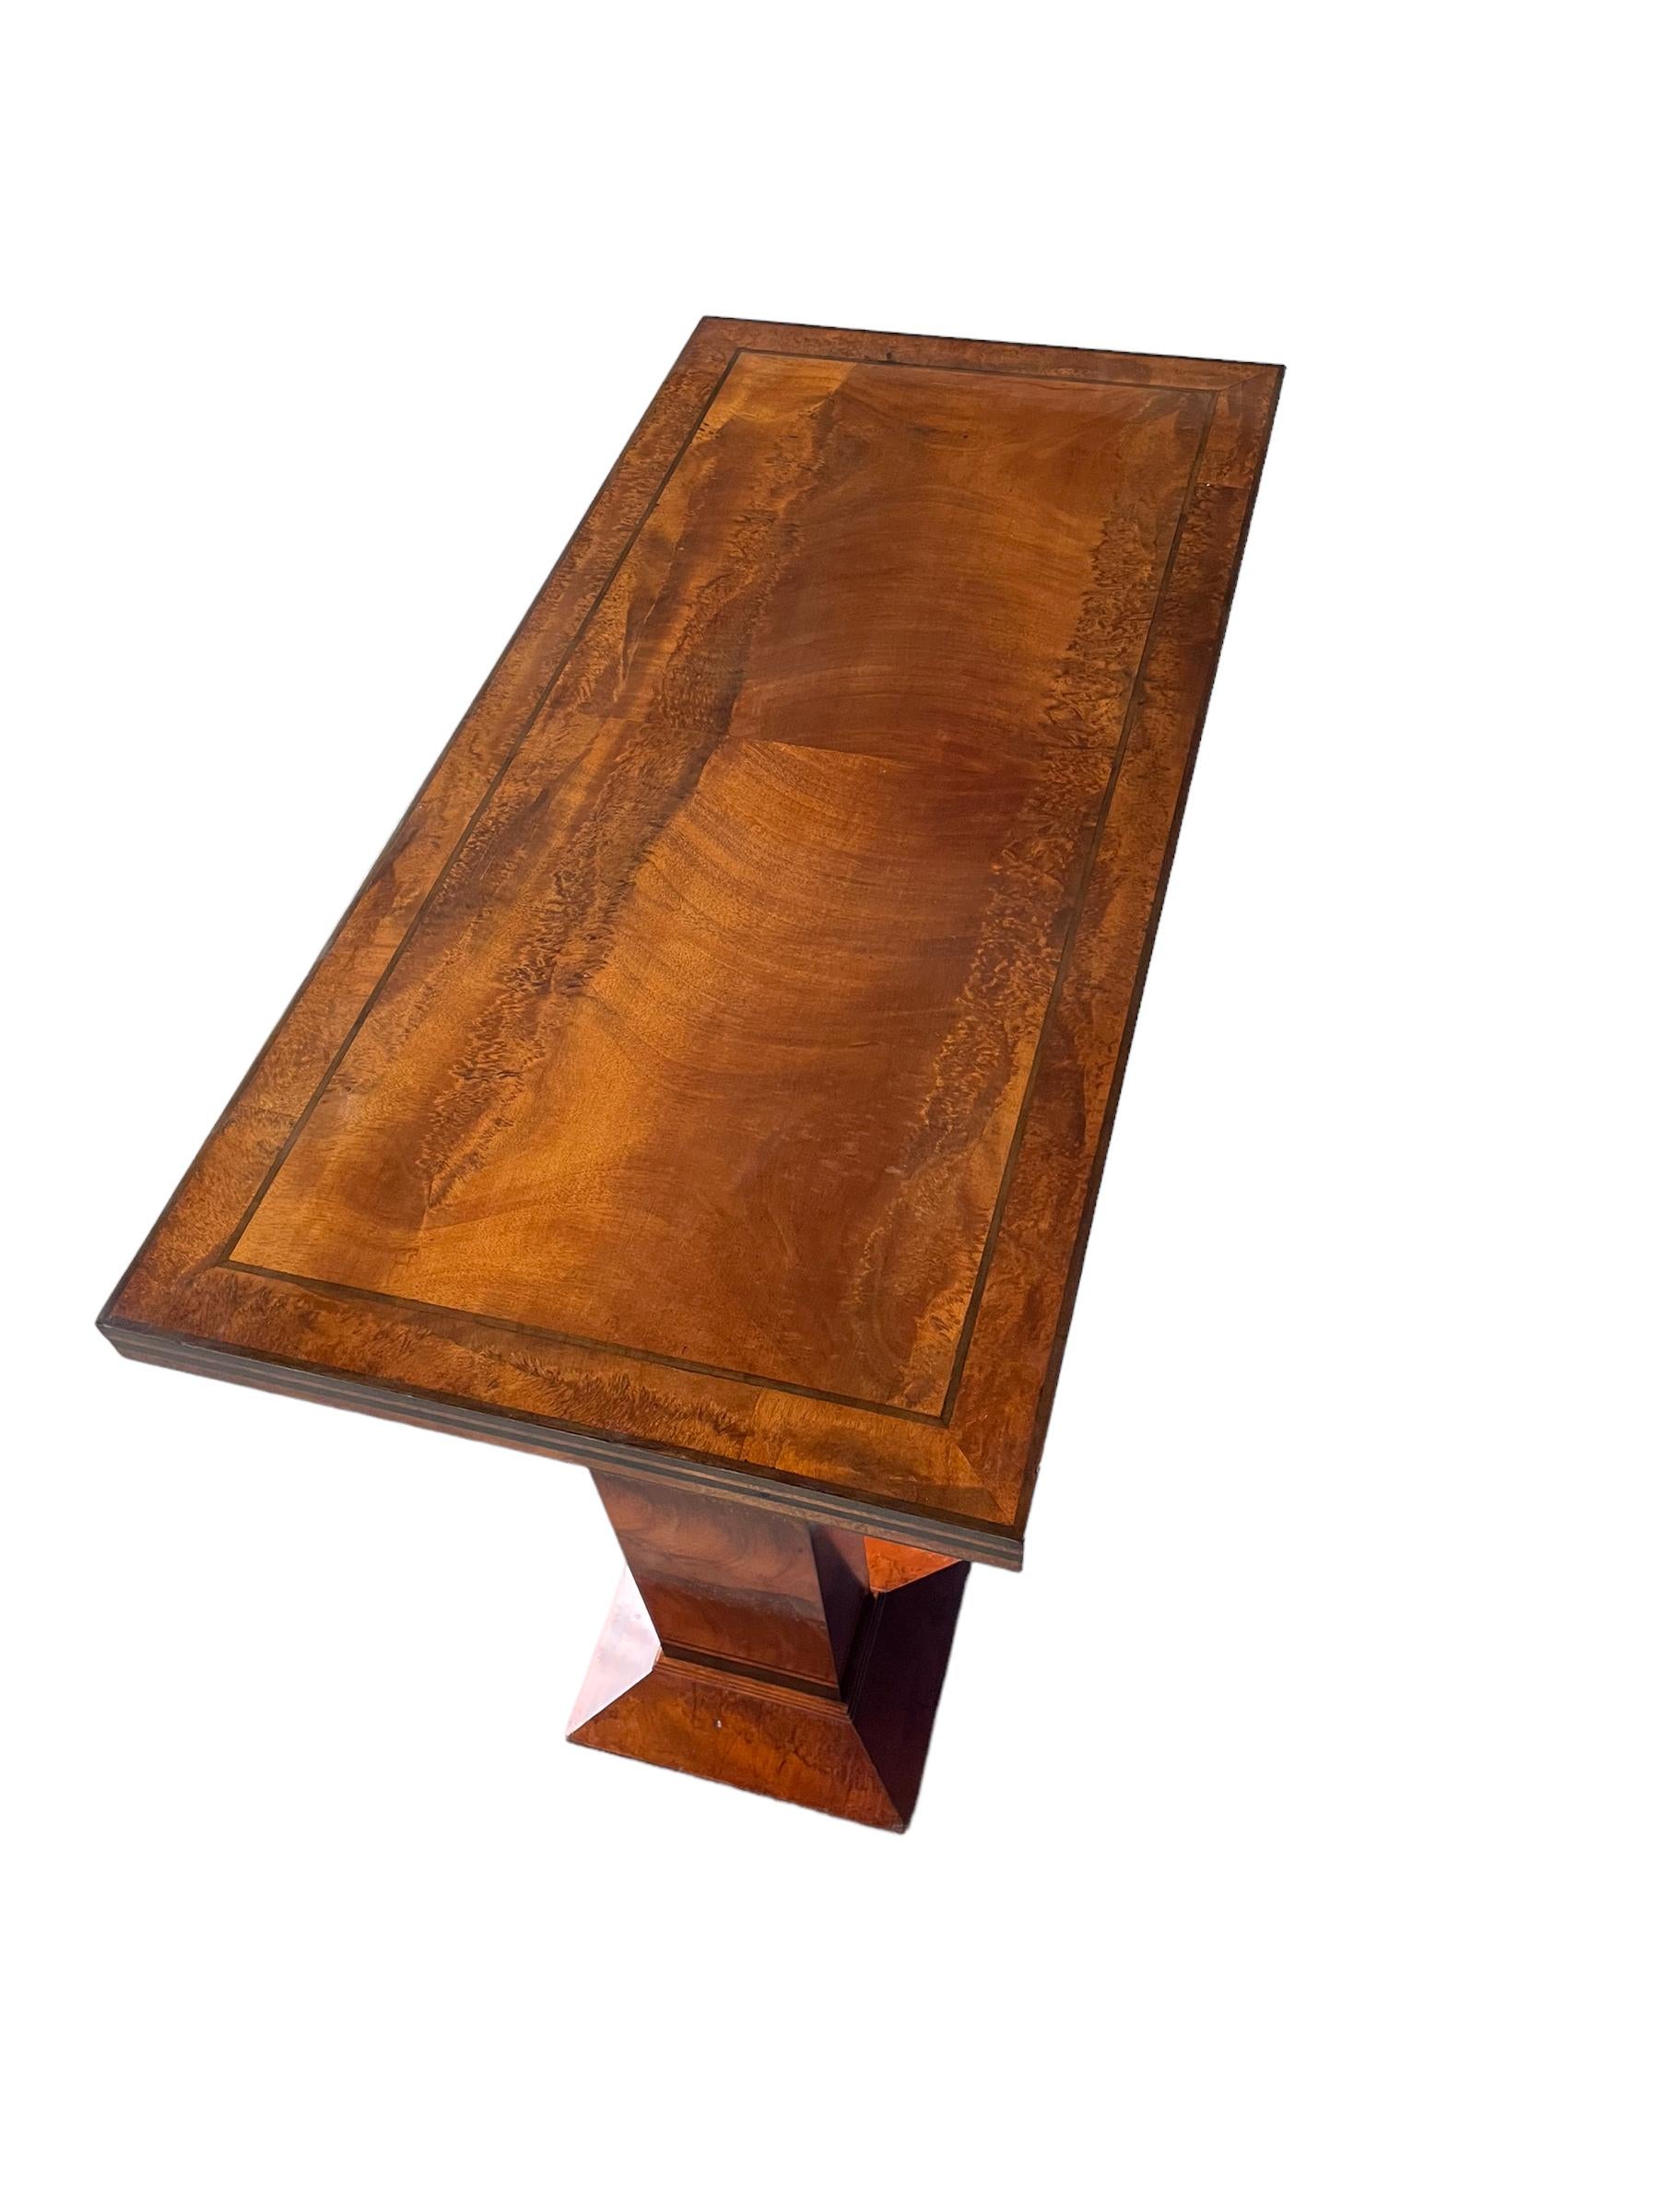 A fine Console/Serving table by Charles A Richter for Bath Cabinet Makers. In figured mahogany, with ebony banding. The rectangular top, supported by rectangular pedestals, with angled feet and a central shelf.
The matching sideboard also available